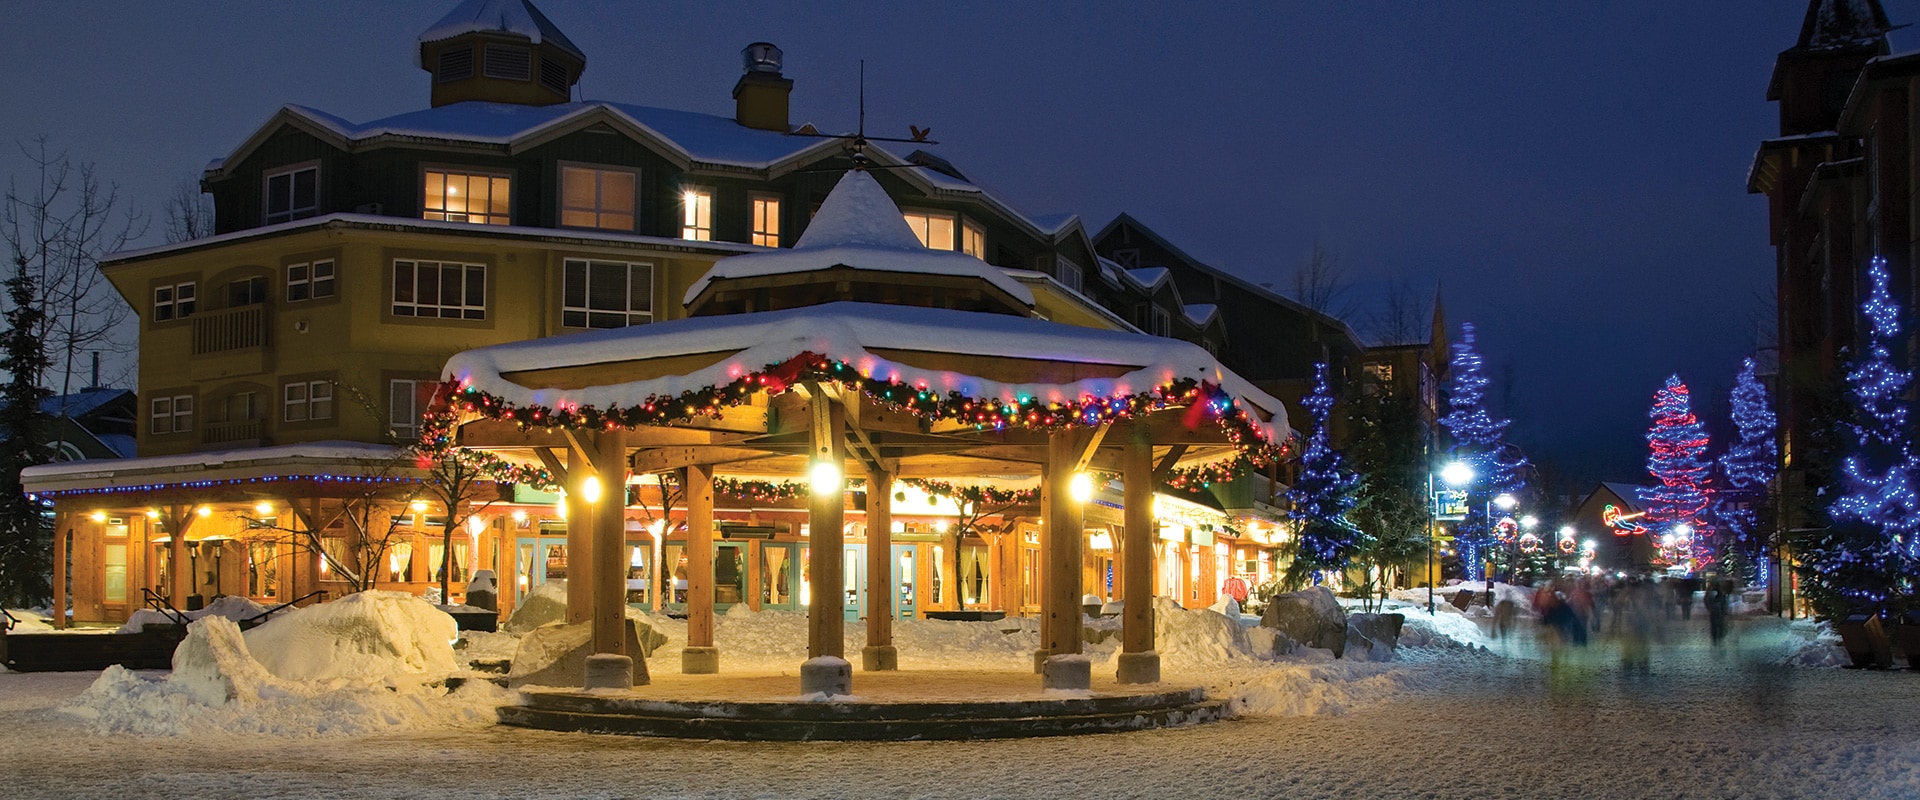 Alpine village lit up at night for Christmas, Whistler